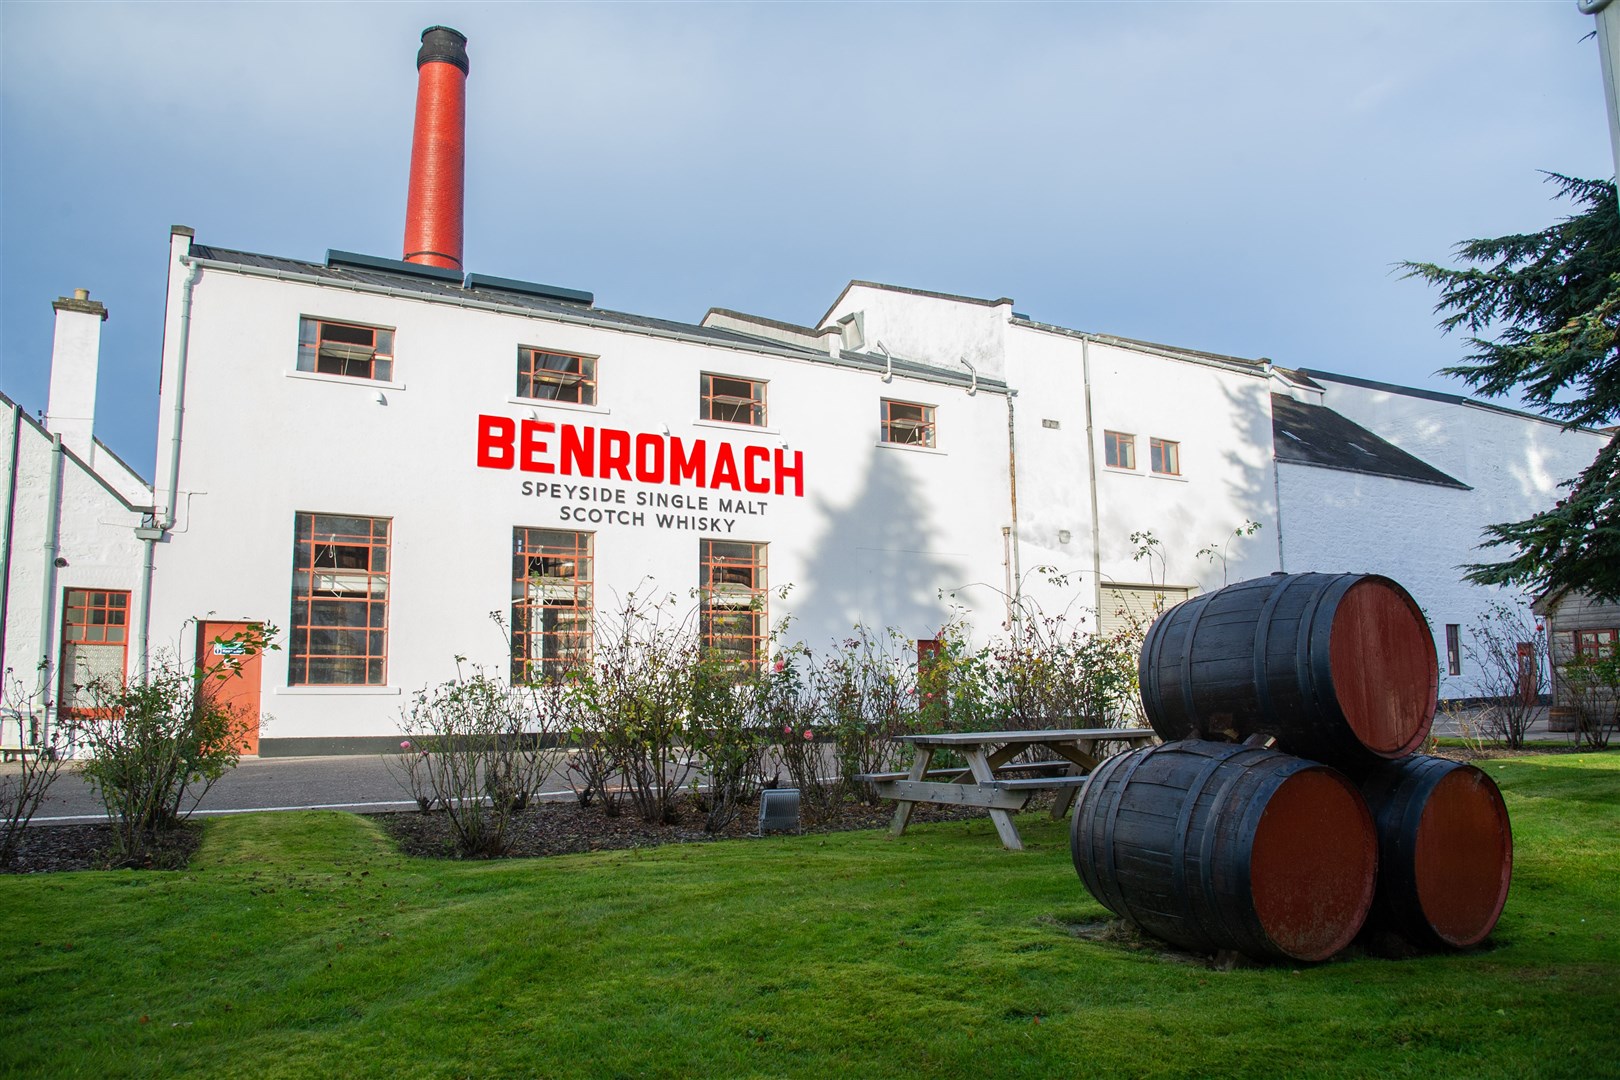 Benromach products have contributed to increased sales.